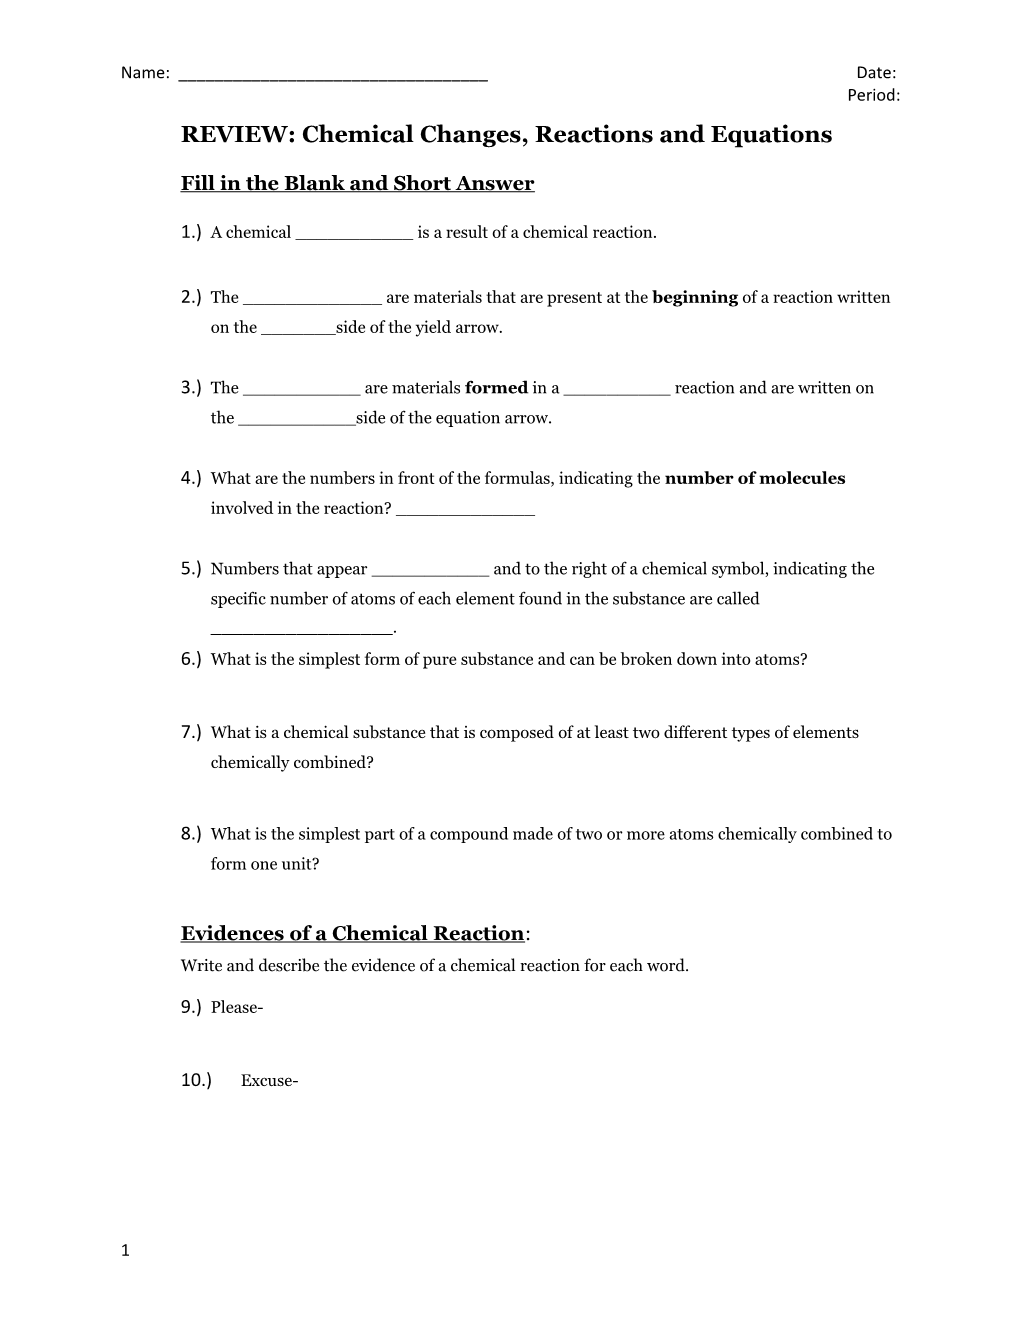 REVIEW: Chemical Changes, Reactions and Equations